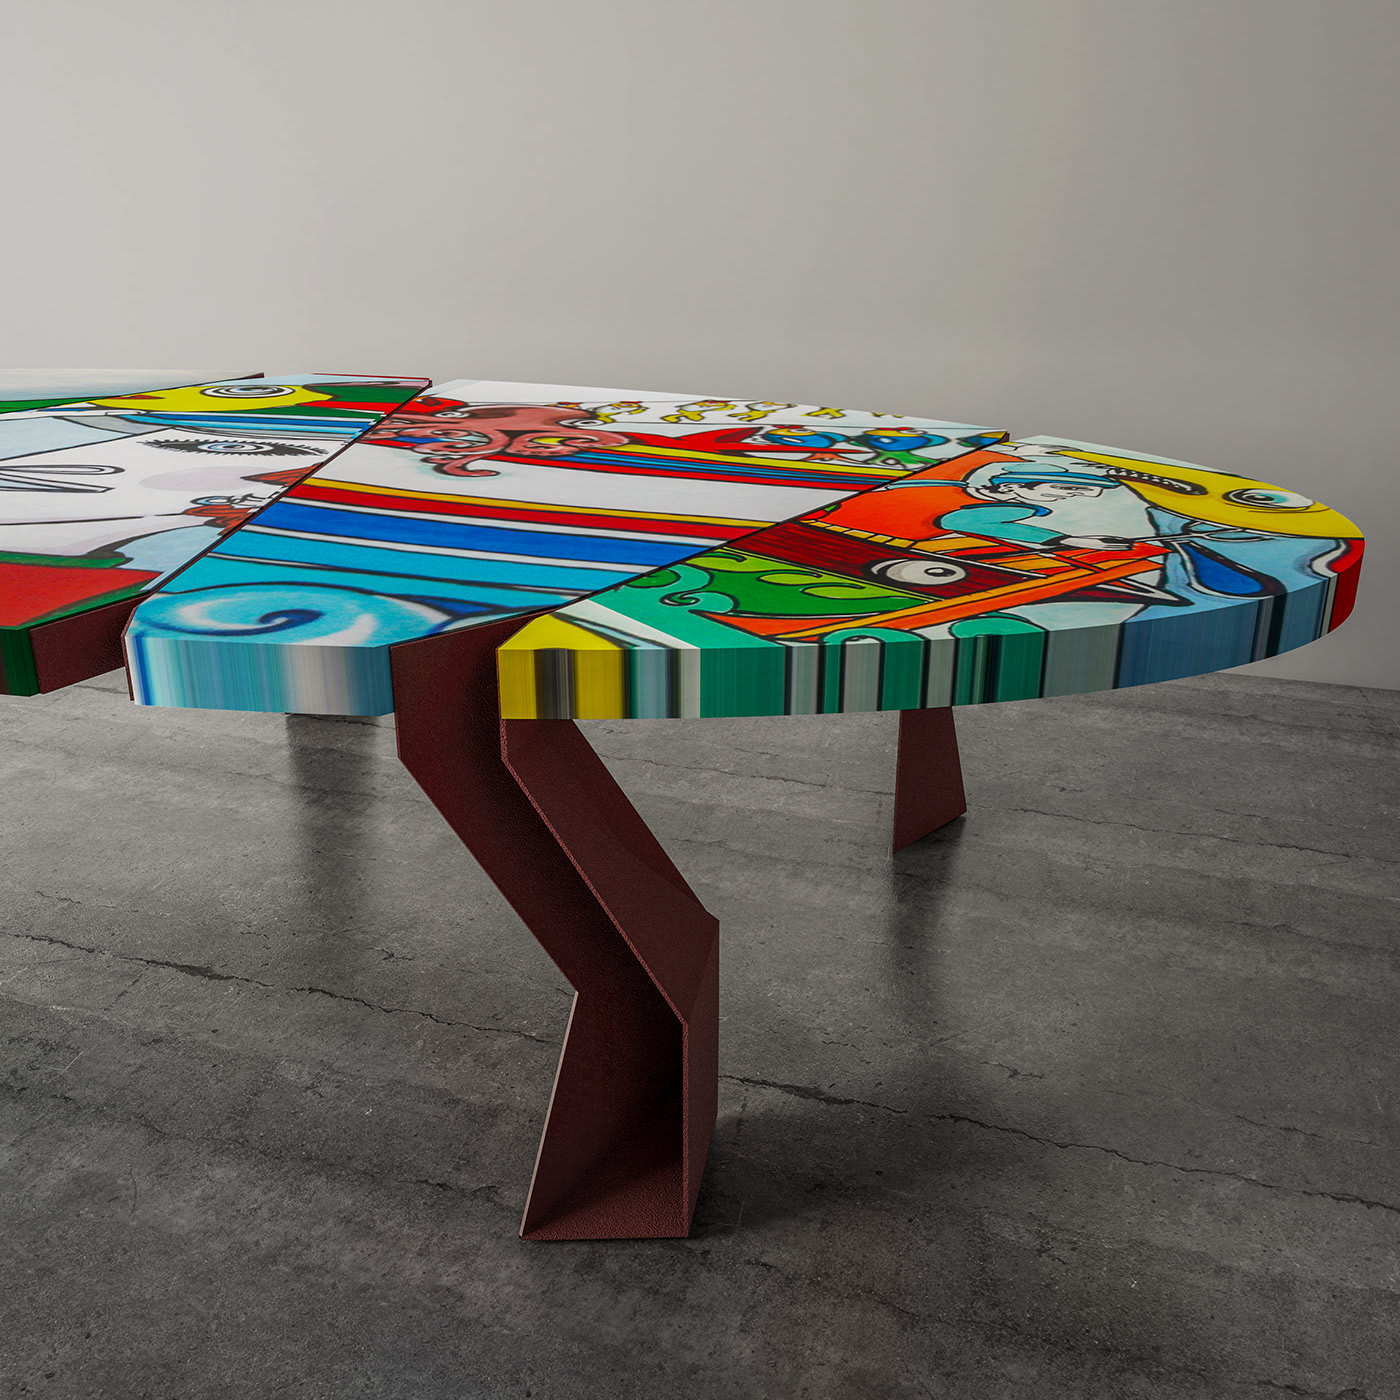 Cantastorie Limited Edition Table - Notempo